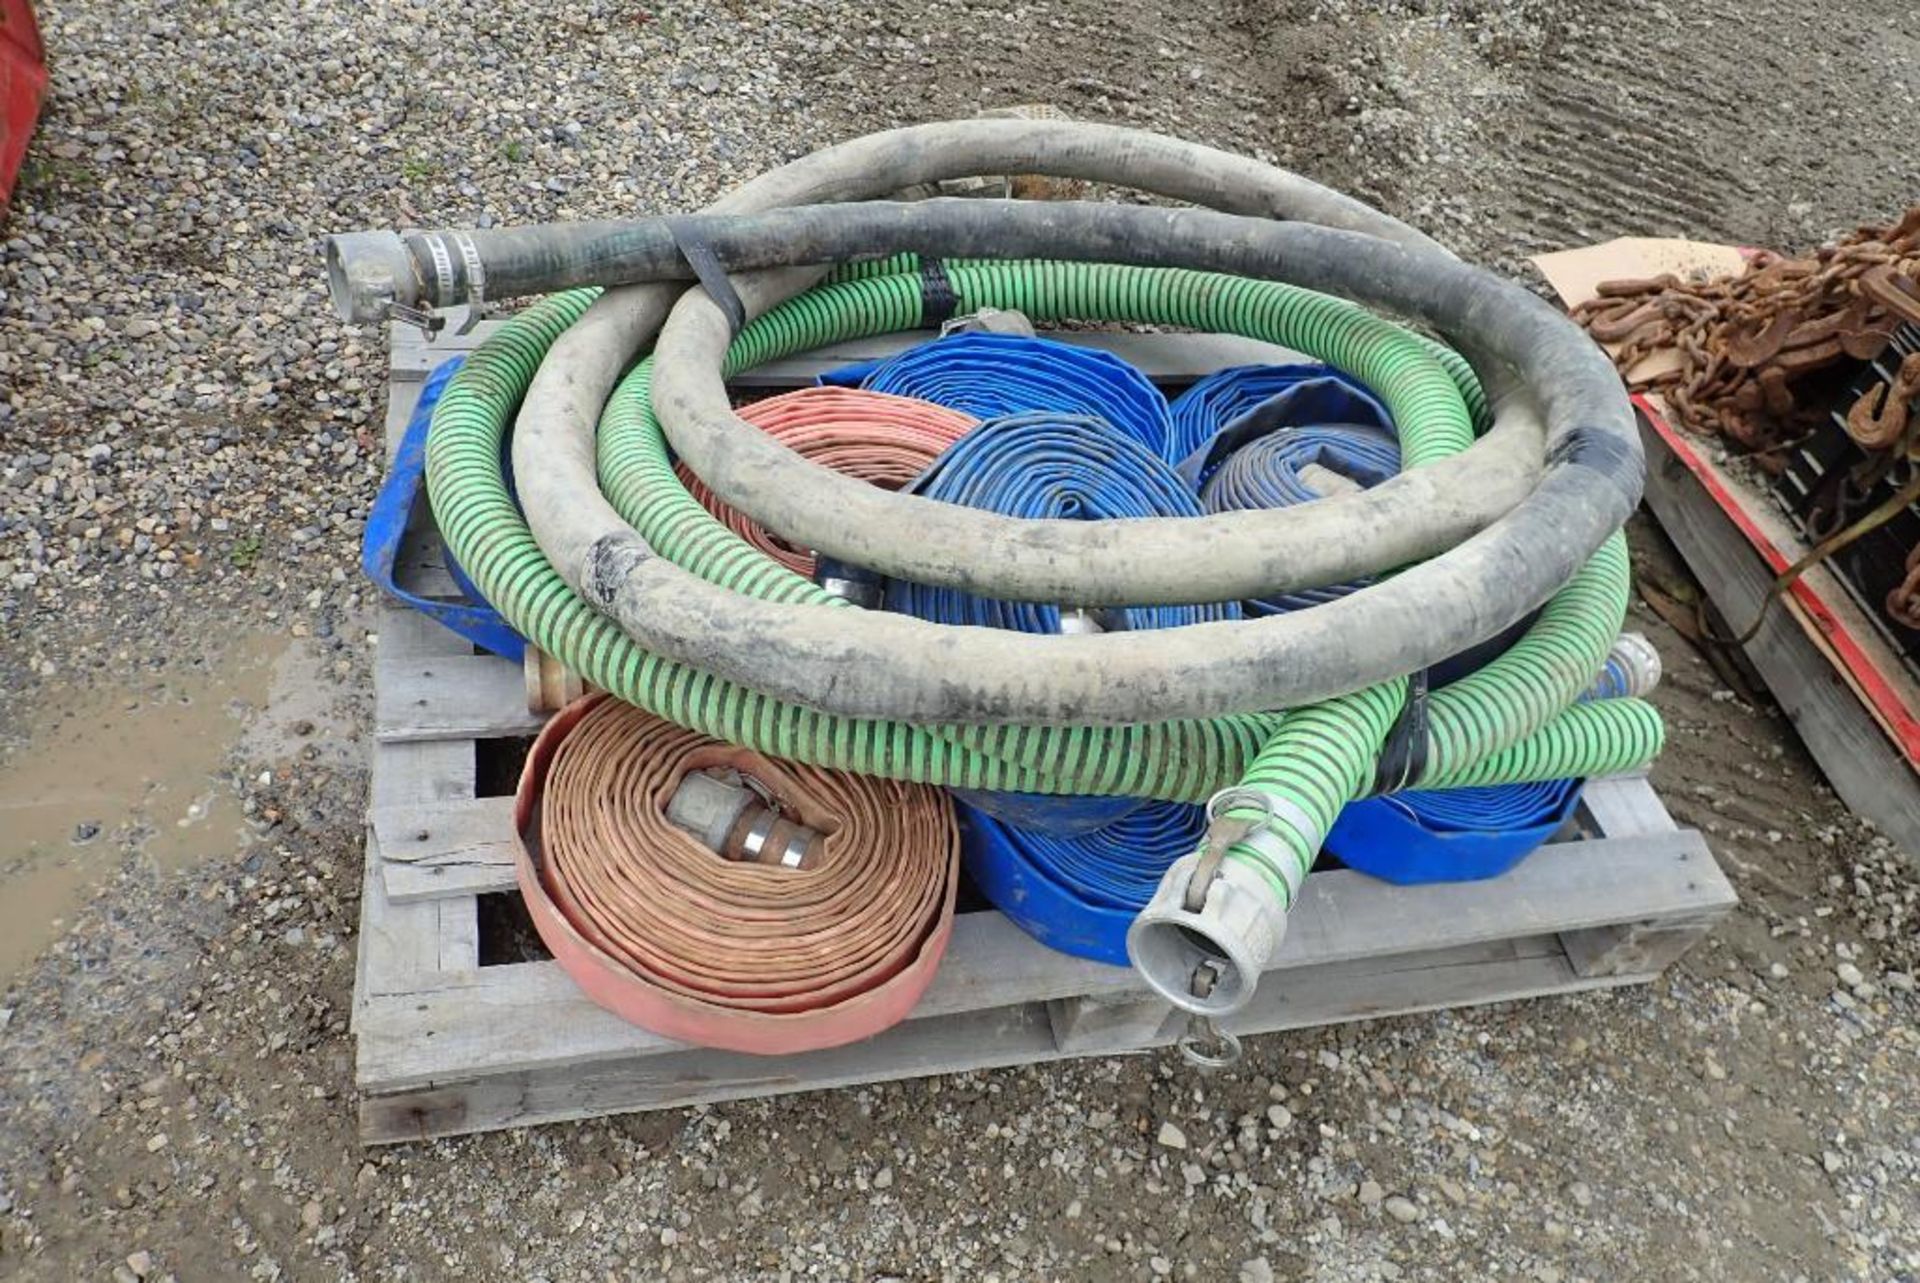 Lot of 2 1/2" Intake and Discharge Hose.